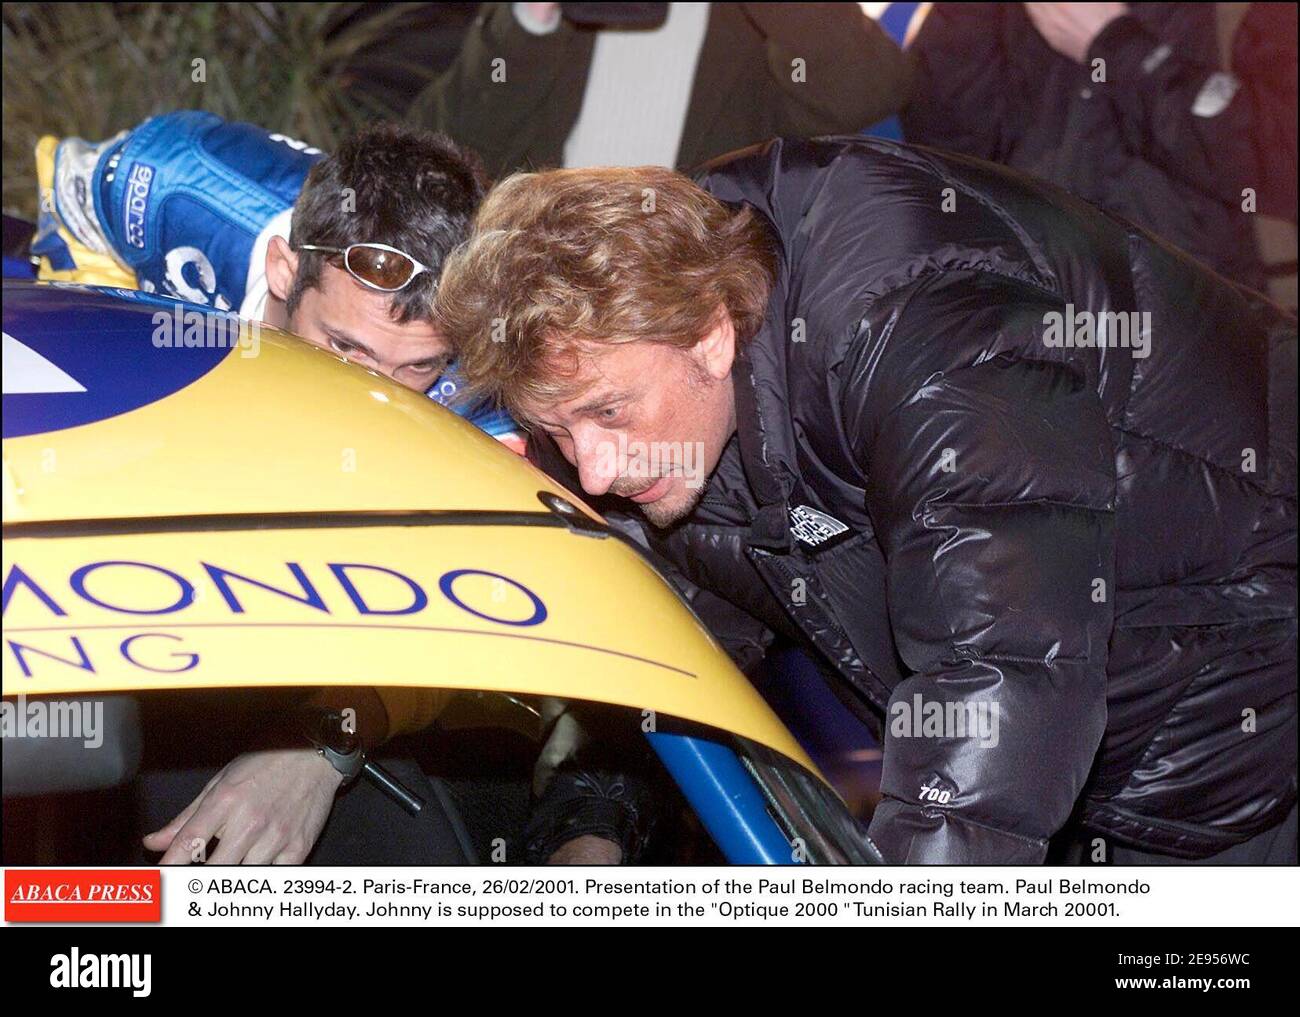 © ABACA. 23994-2. Paris-France, 26/02/2001. Presentation of the Paul Belmondo racing team. Paul Belmondo & Johnny Hallyday. Johnny is supposed to compete in the Optique 2000 Tunisian Rally in March 20001. Stock Photo